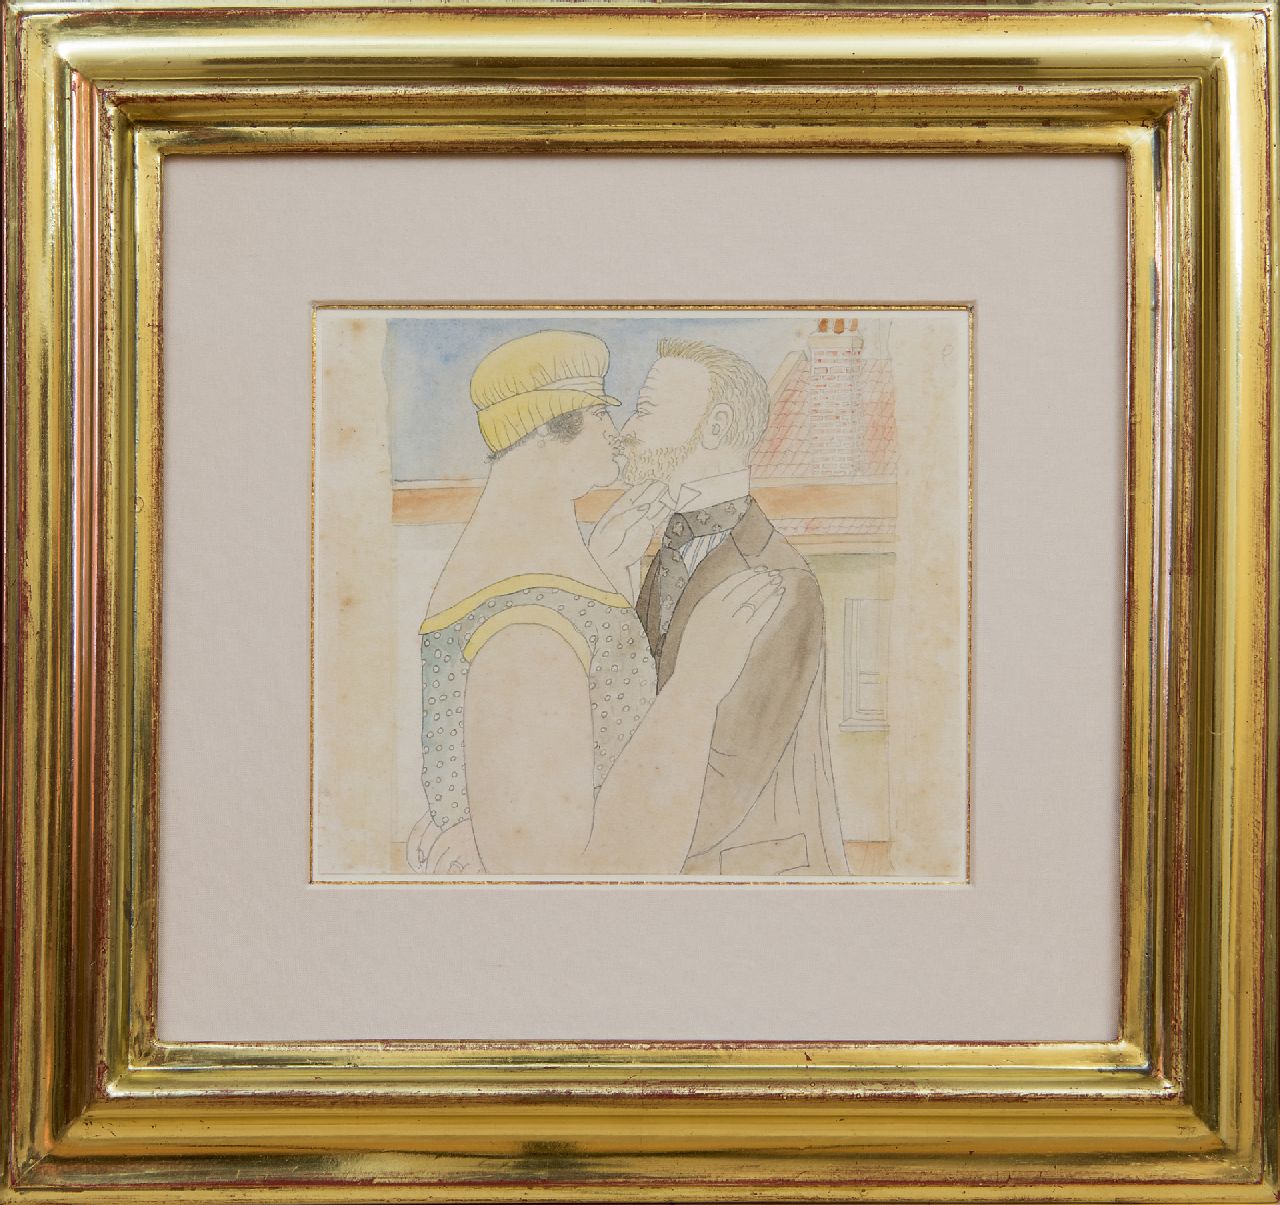 Erfmann F.G.  | 'Ferdinand' George Erfmann | Watercolours and drawings offered for sale | A kiss on the rooftop, pencil and watercolour on paper 15.0 x 13.0 cm